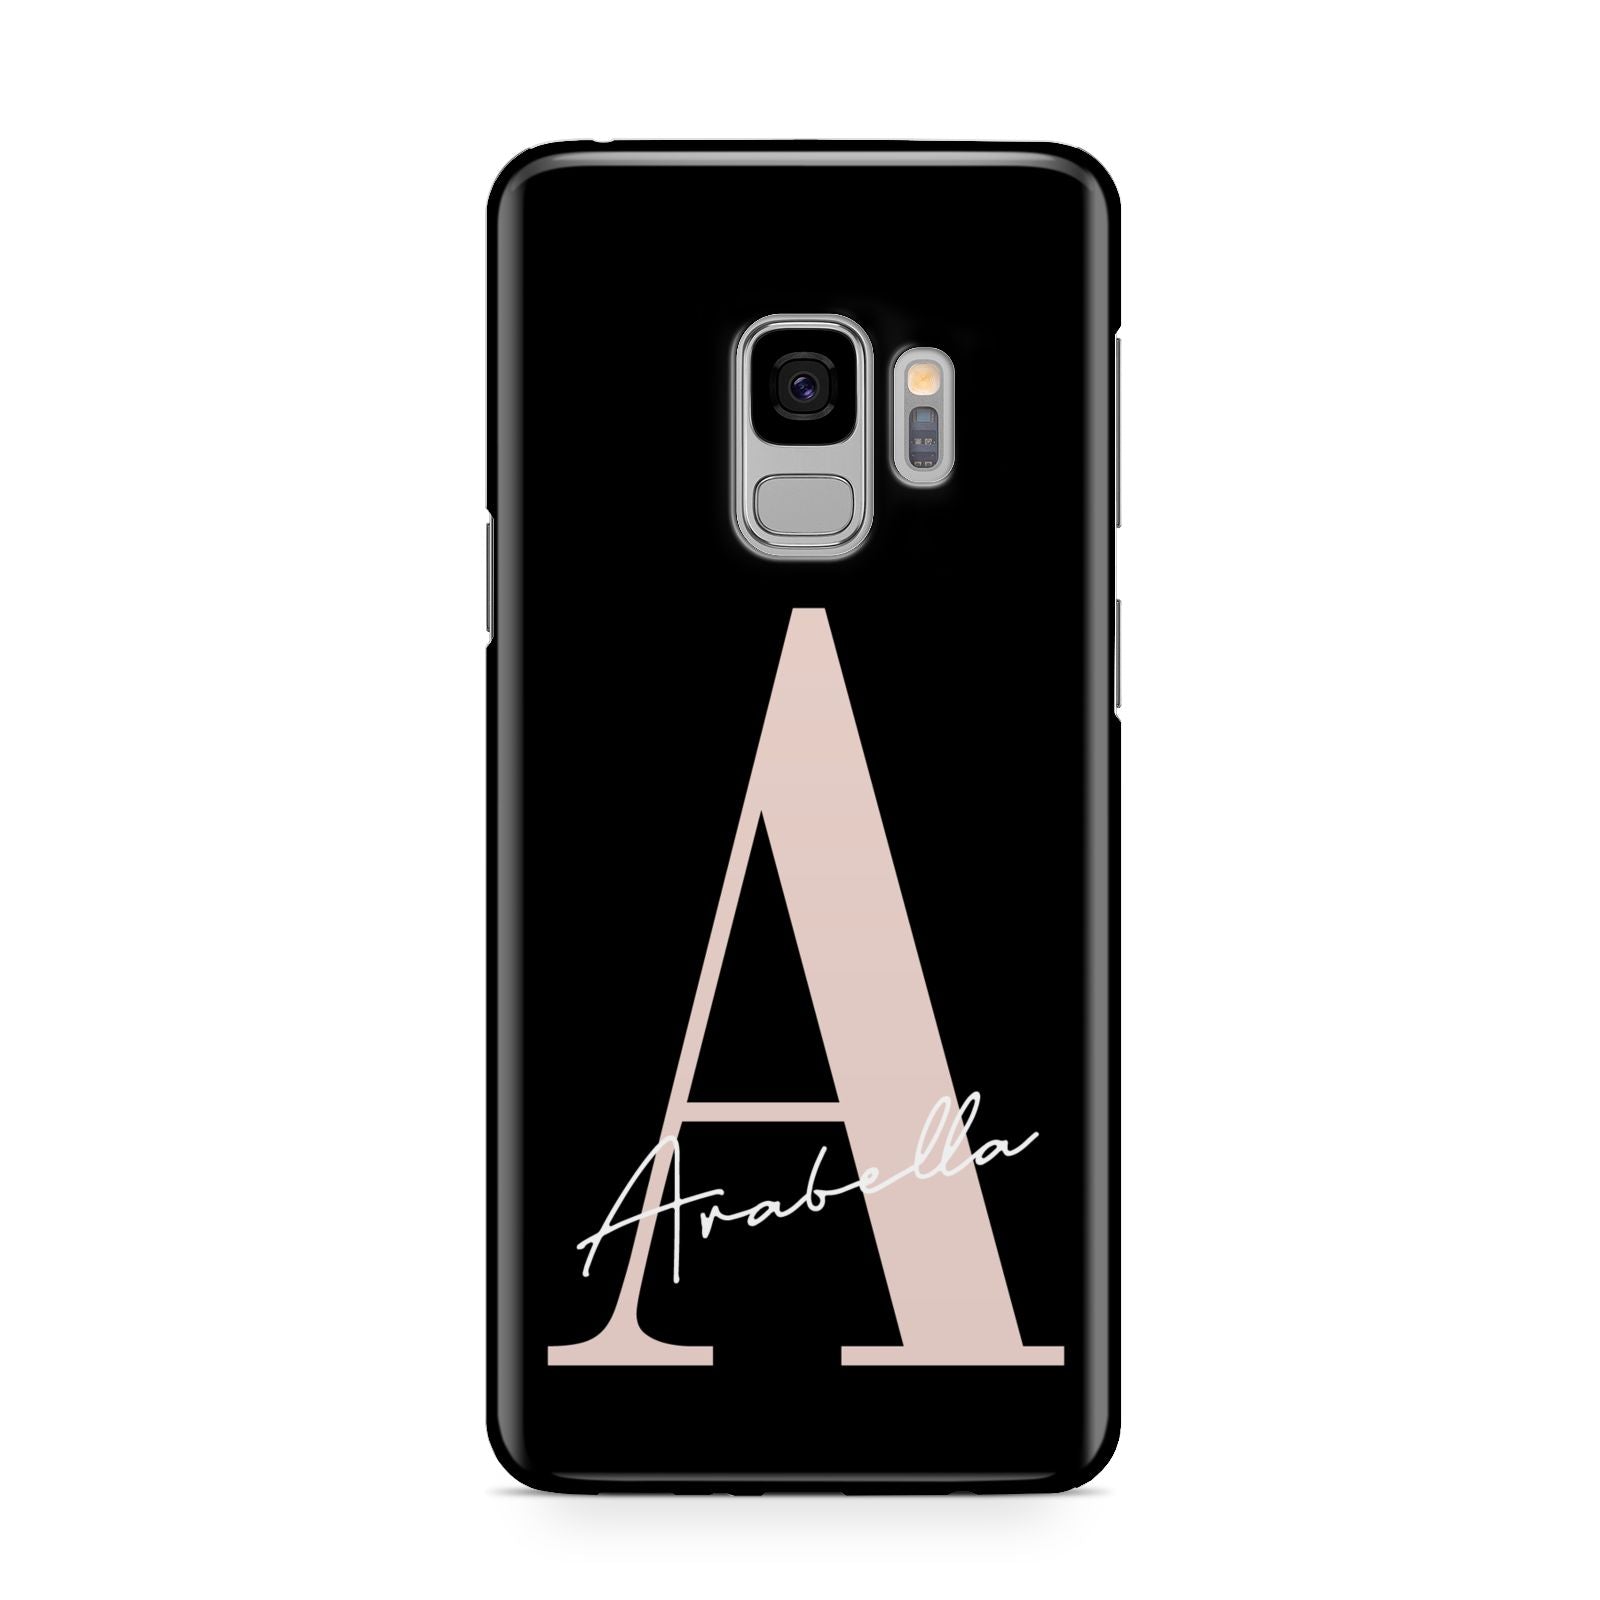 Personalised Black Pink Initial Samsung Galaxy S9 Case